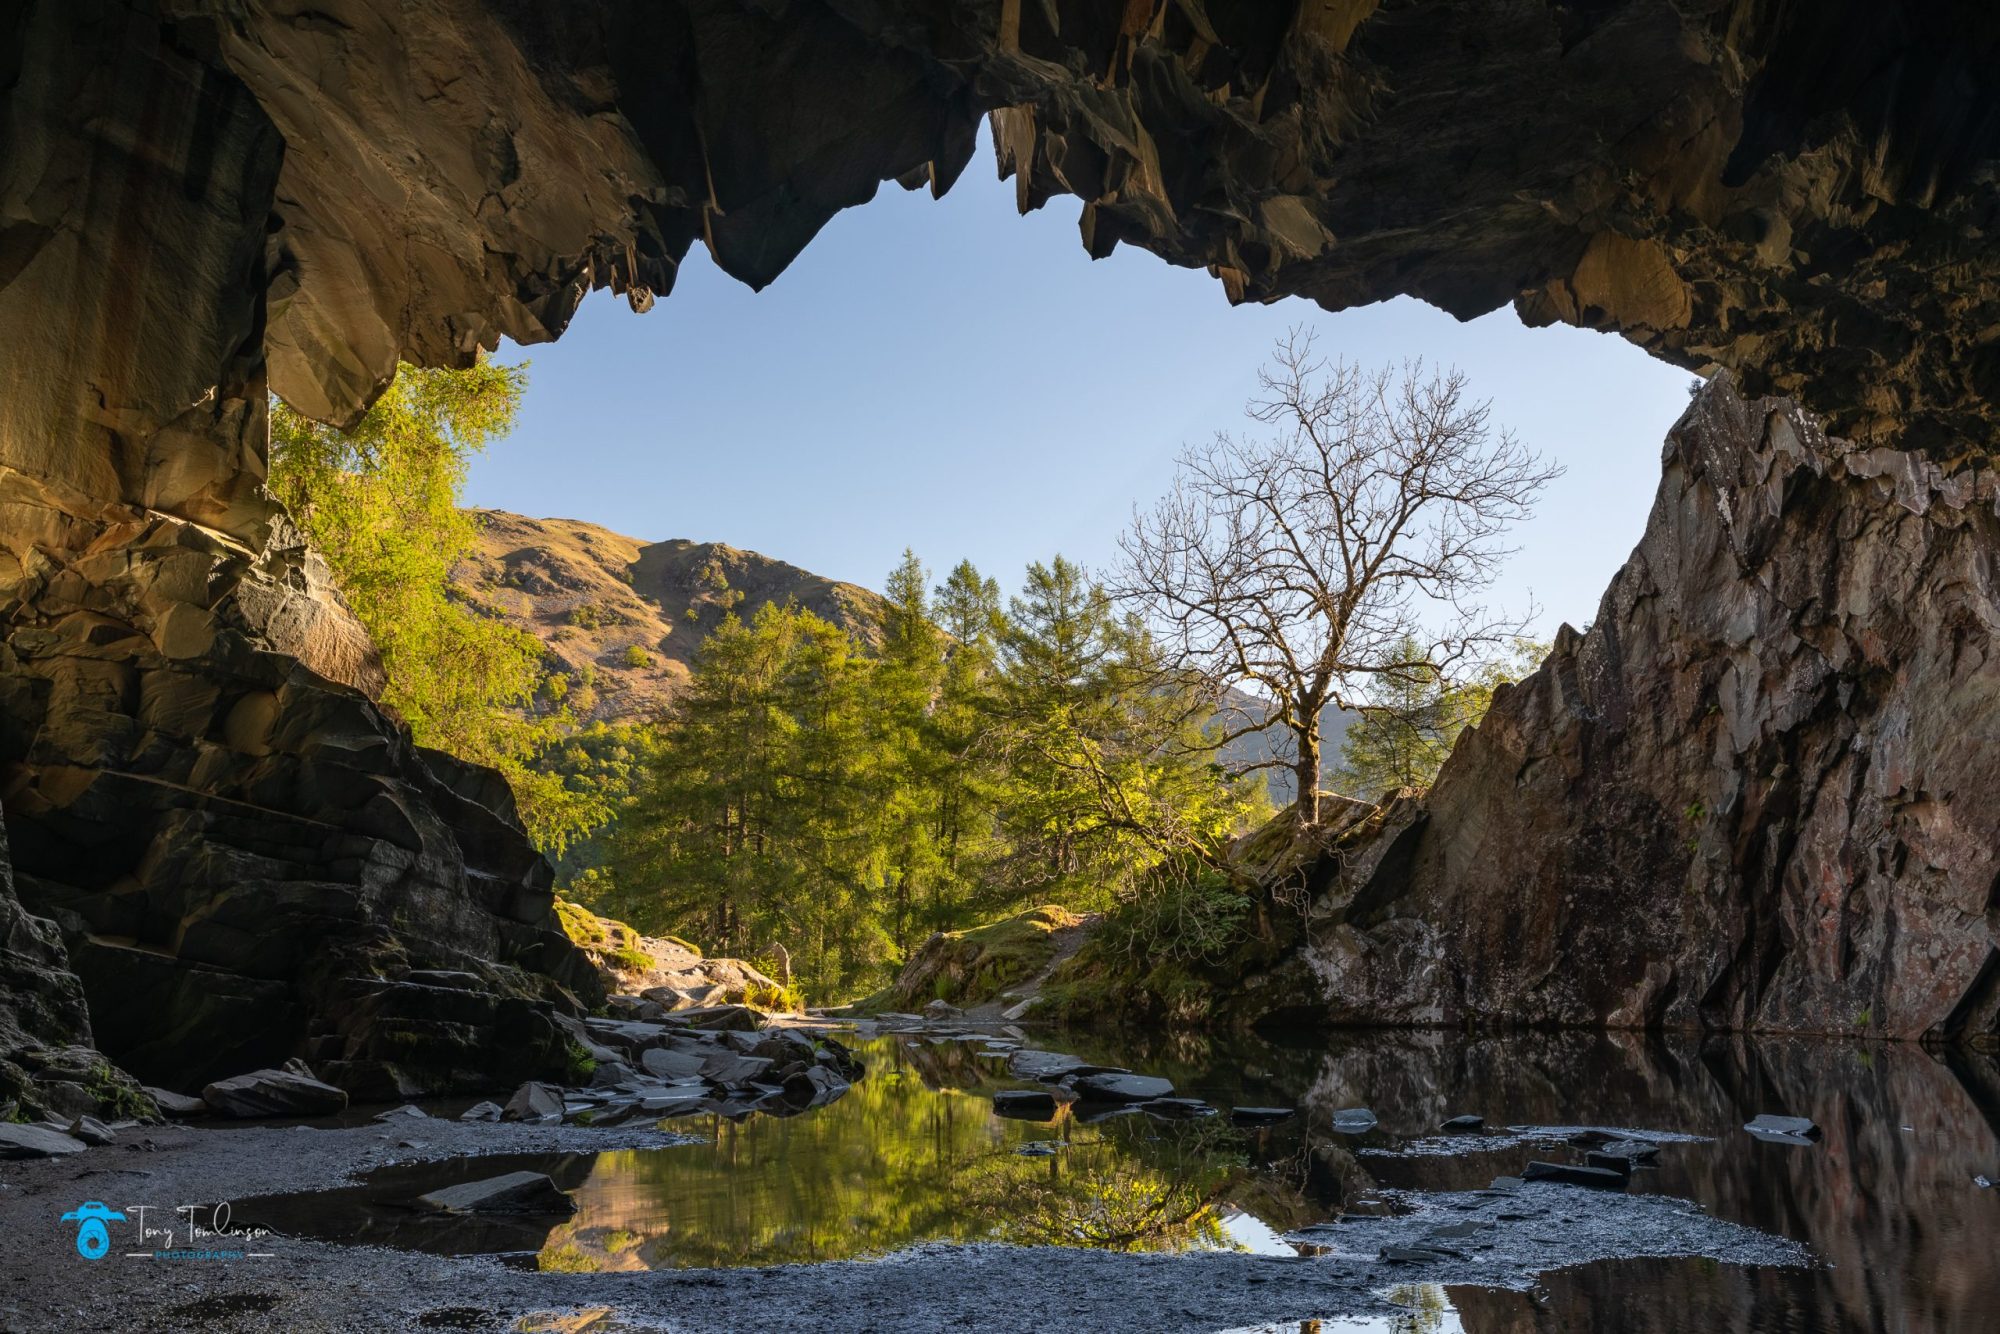 tony-tomlinson-photography, Rydal-Cave-Lake-District-Landscape-Summer